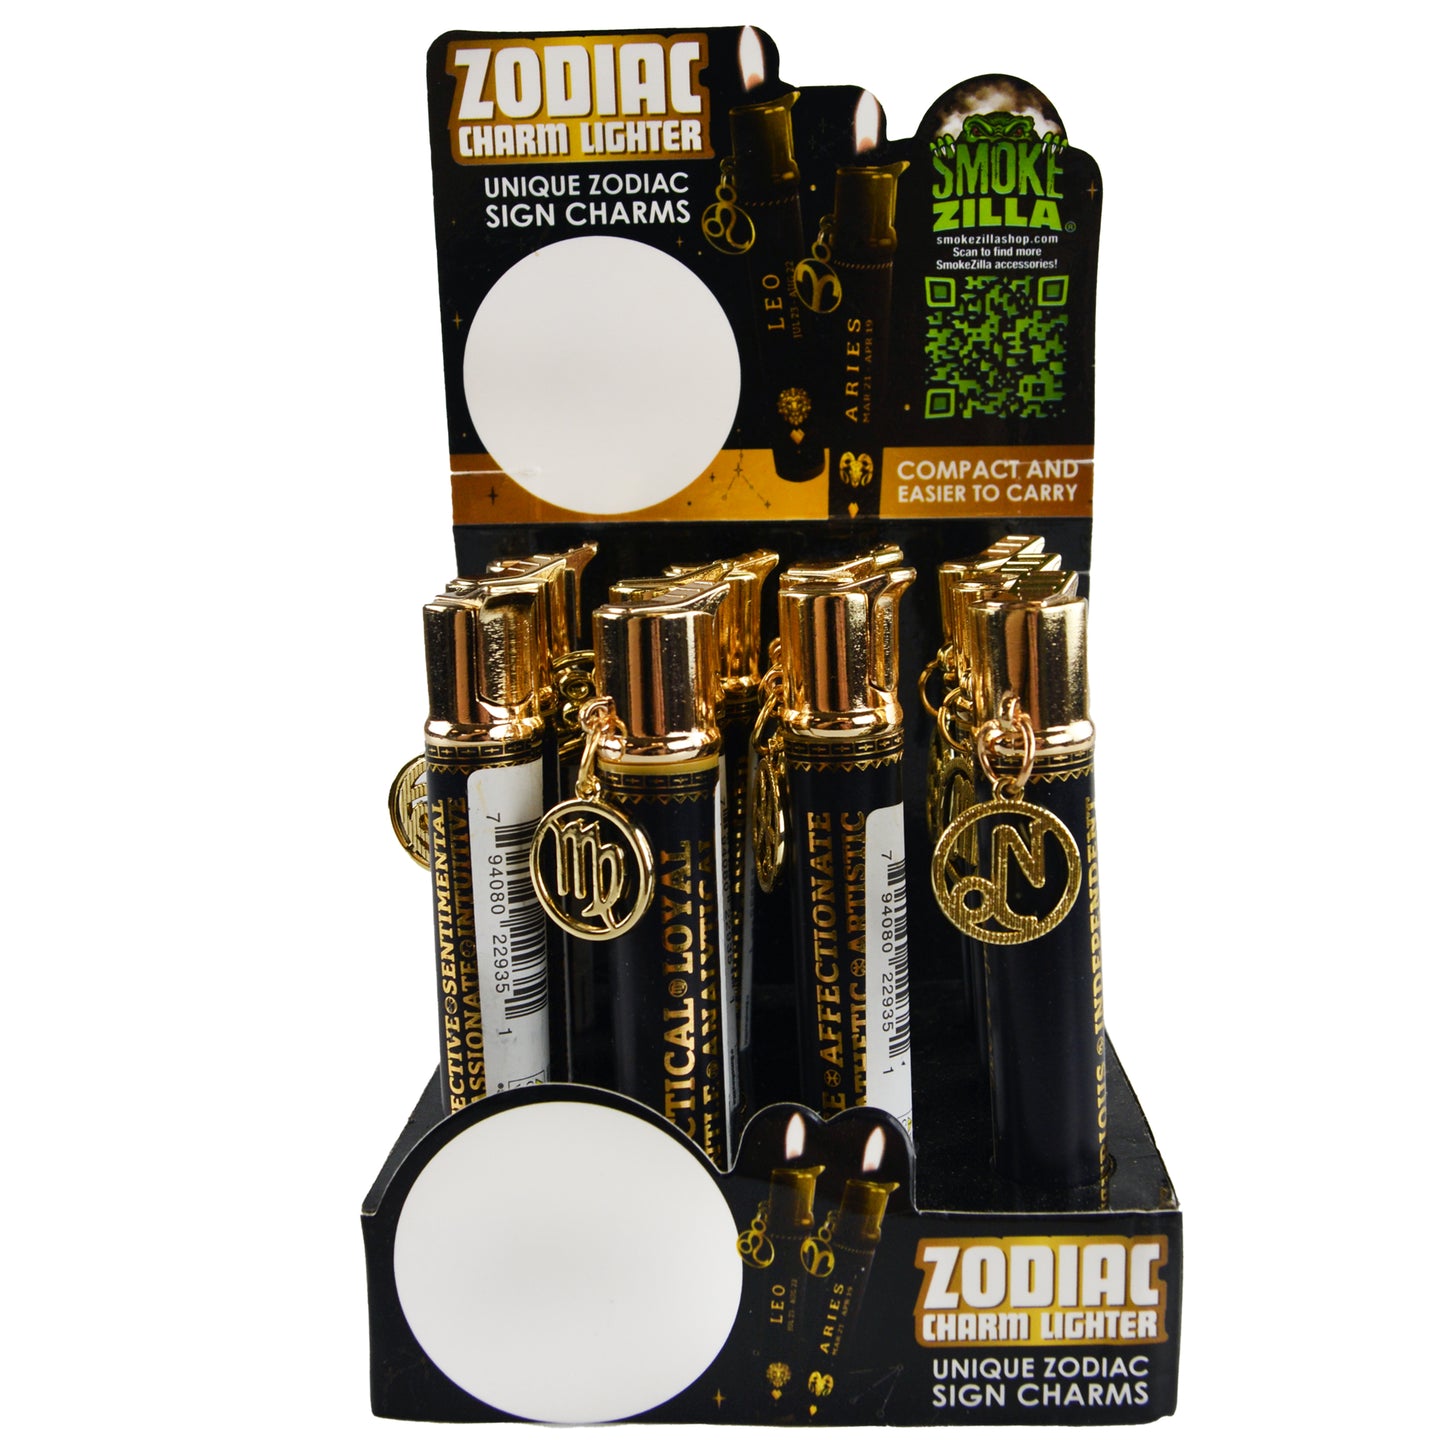 ITEM NUMBER 022935 ZODIAC CHARM LIGHTER 12 PIECES PER DISPLAY